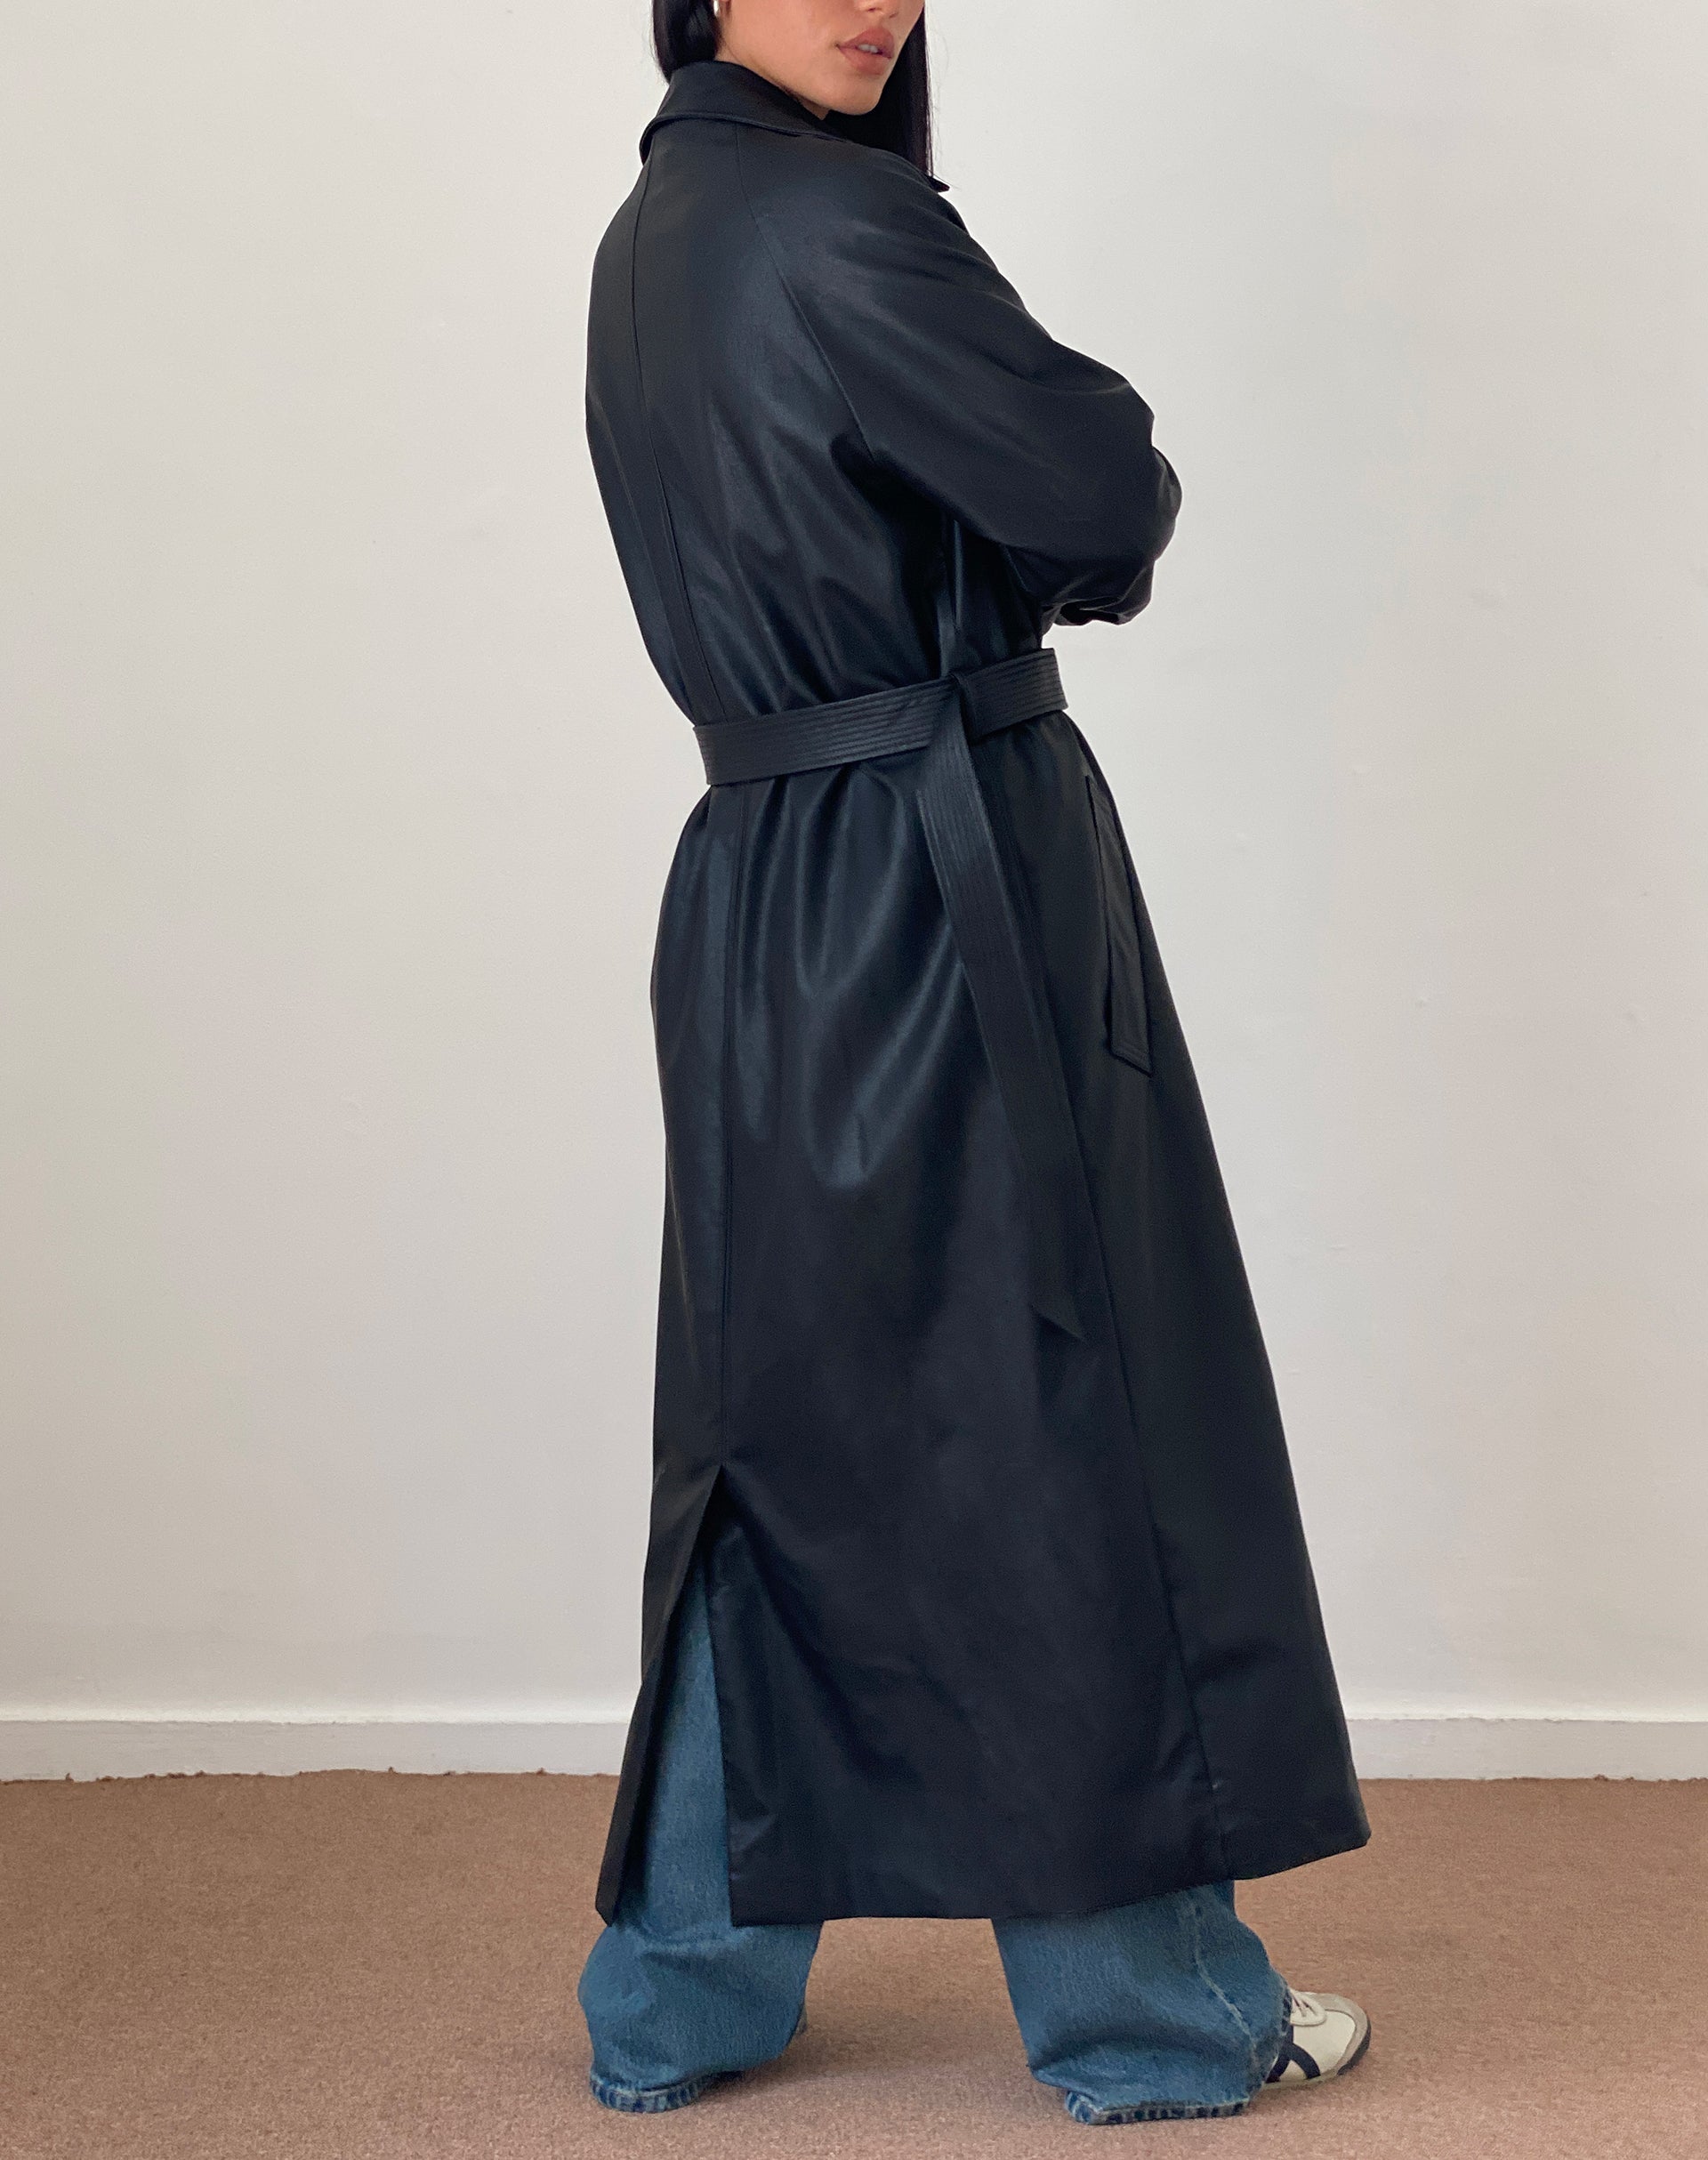 Image of Orcati Double Breasted Trench Coat in Black PU